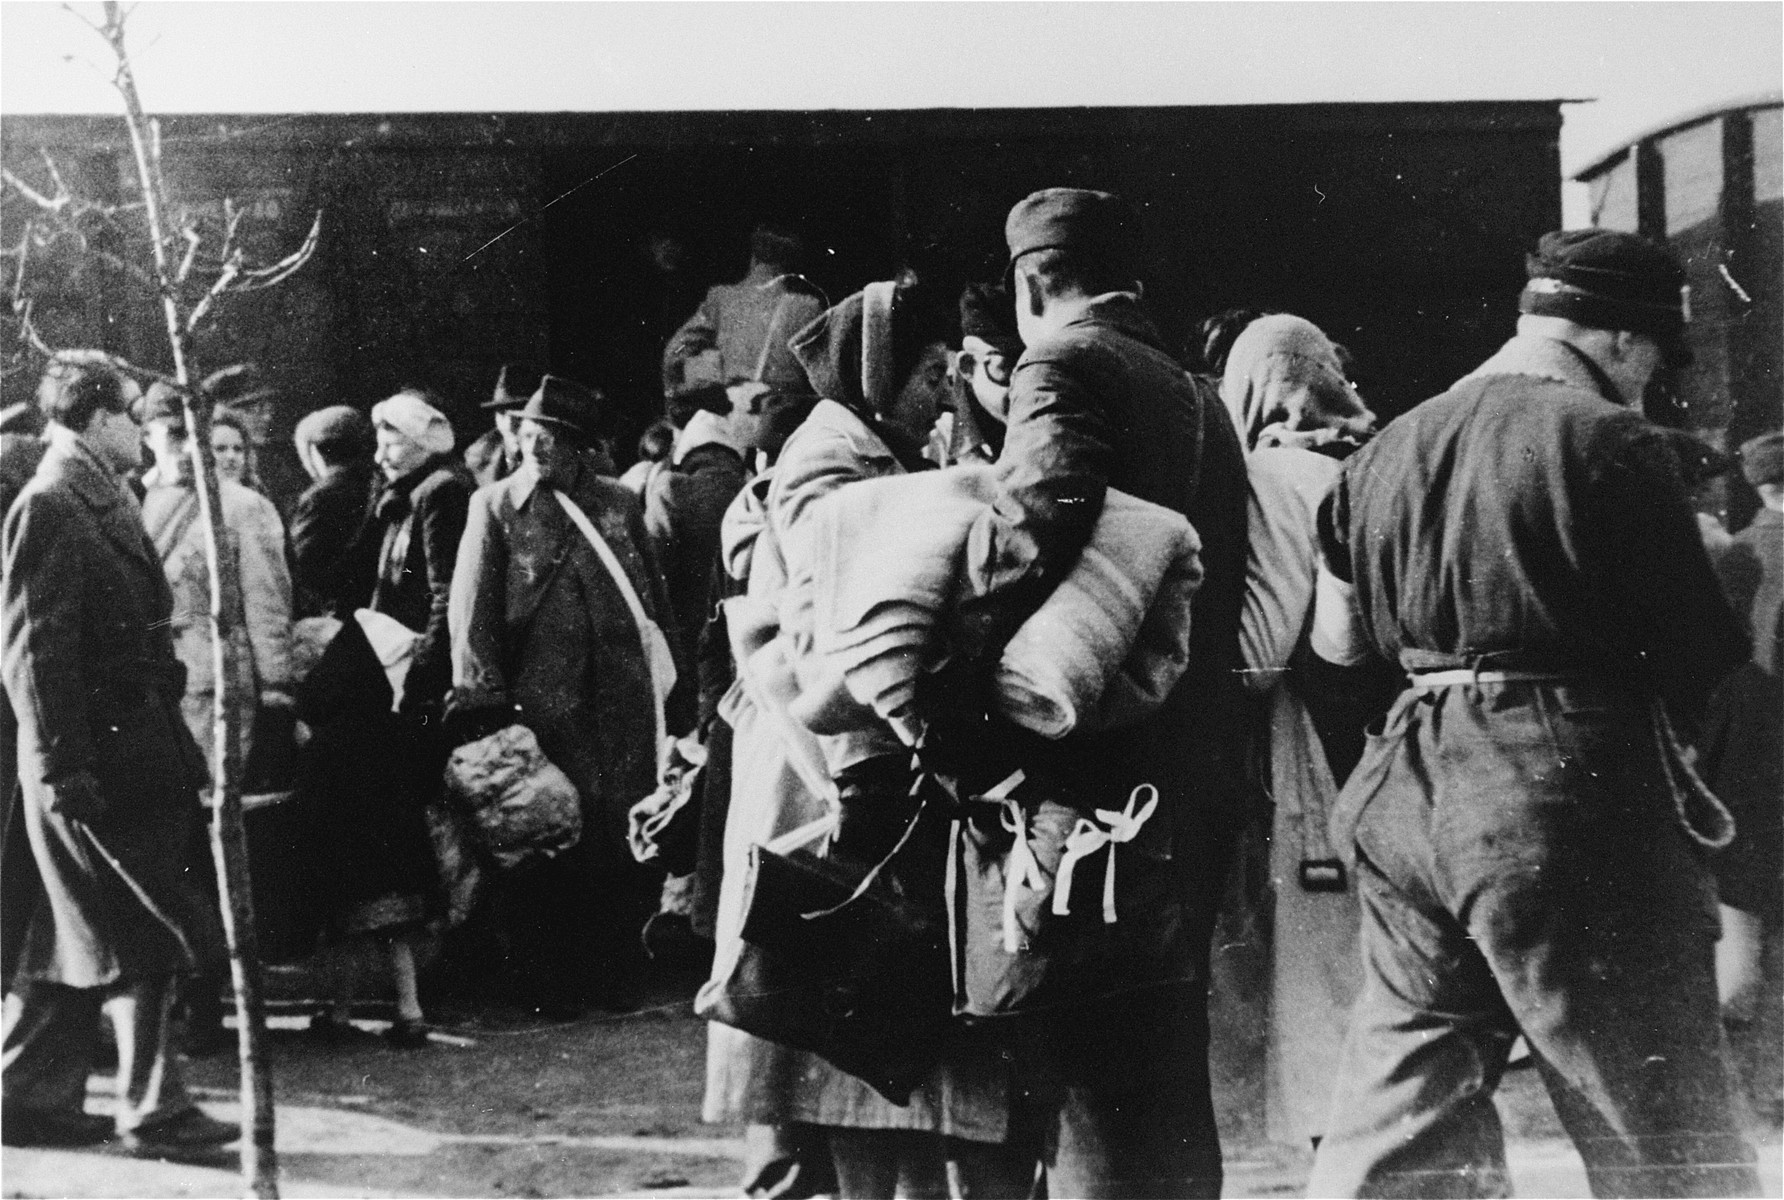 The deportation of Jews from Westerbork.  Members of the Ordedienst (Jewish police) are visible in the foreground.